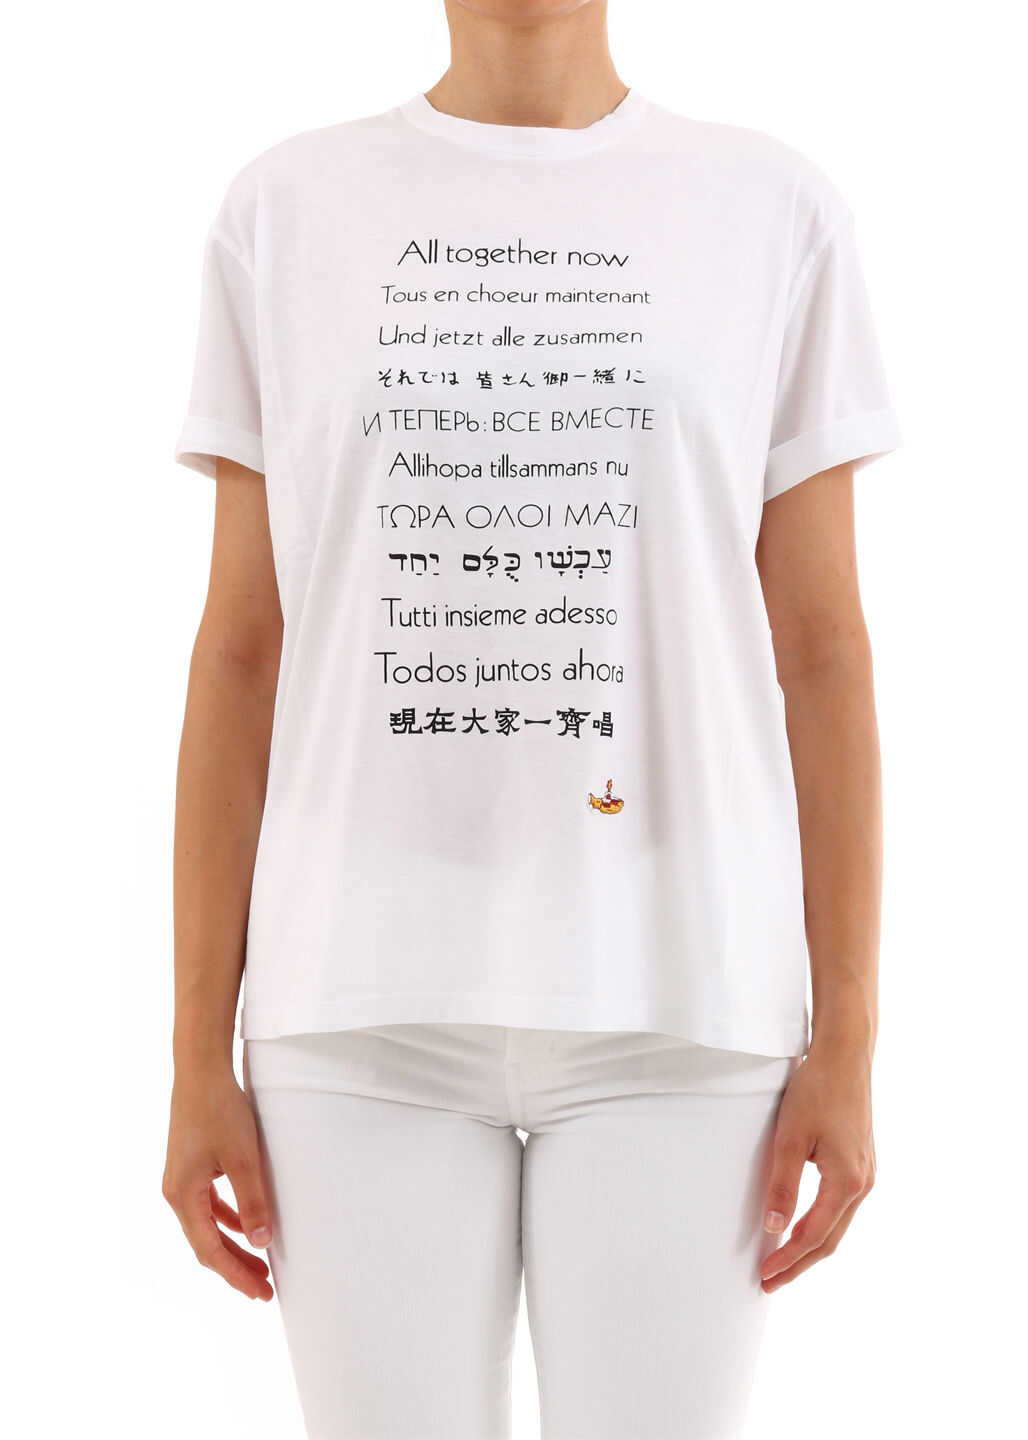 Stella McCartney T-Shirt "All Togther Now" 457142 SMW86 White